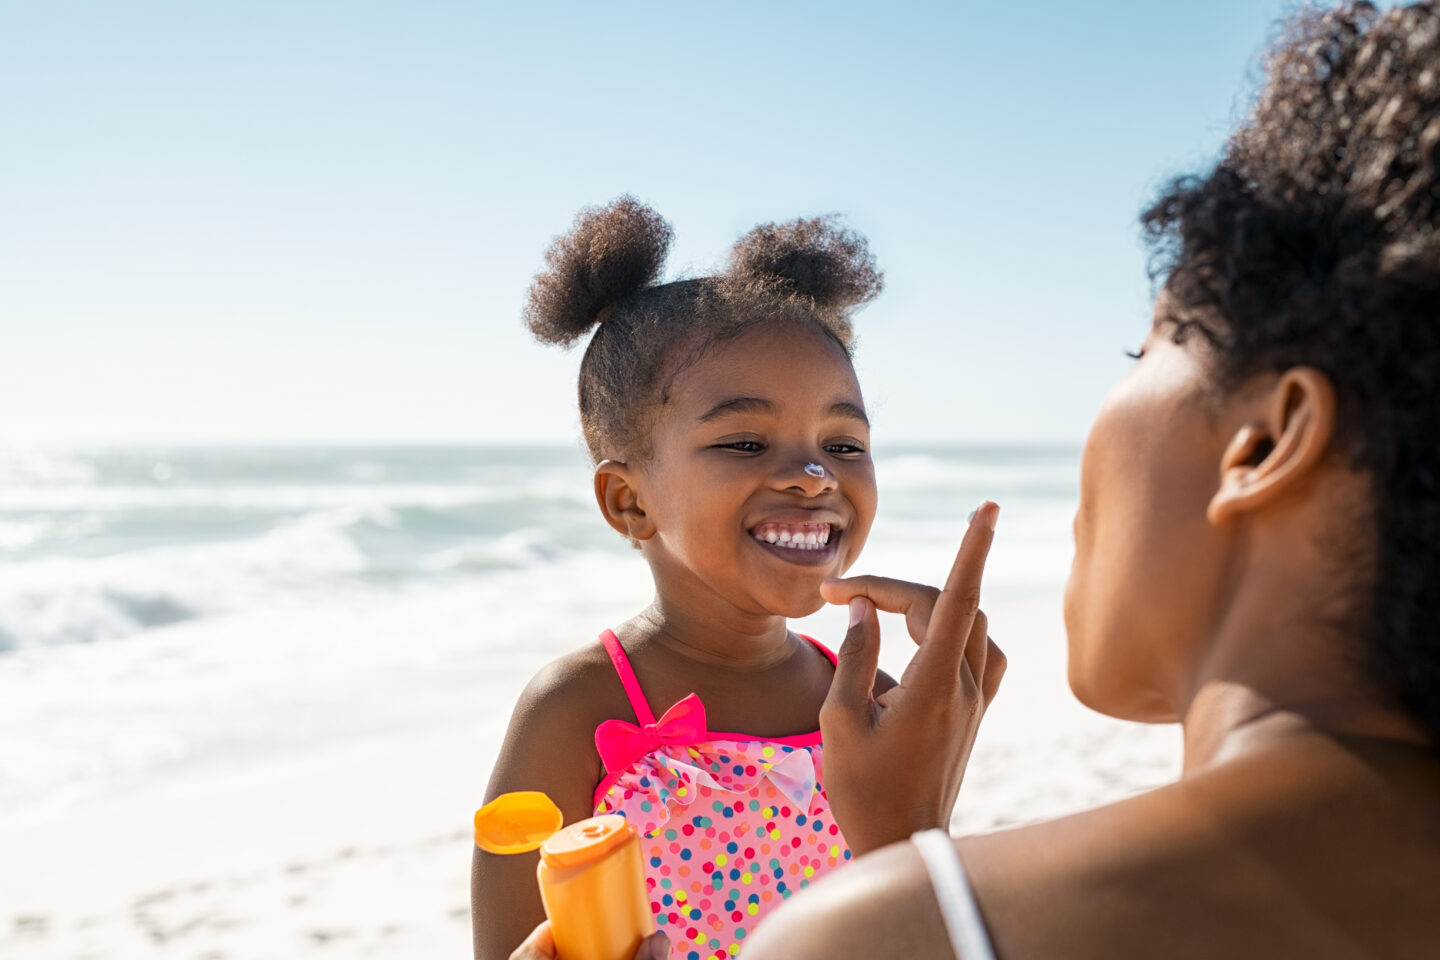 Black mother applying sunscreen on smiling little Black girl with the ocean and beach behind them.